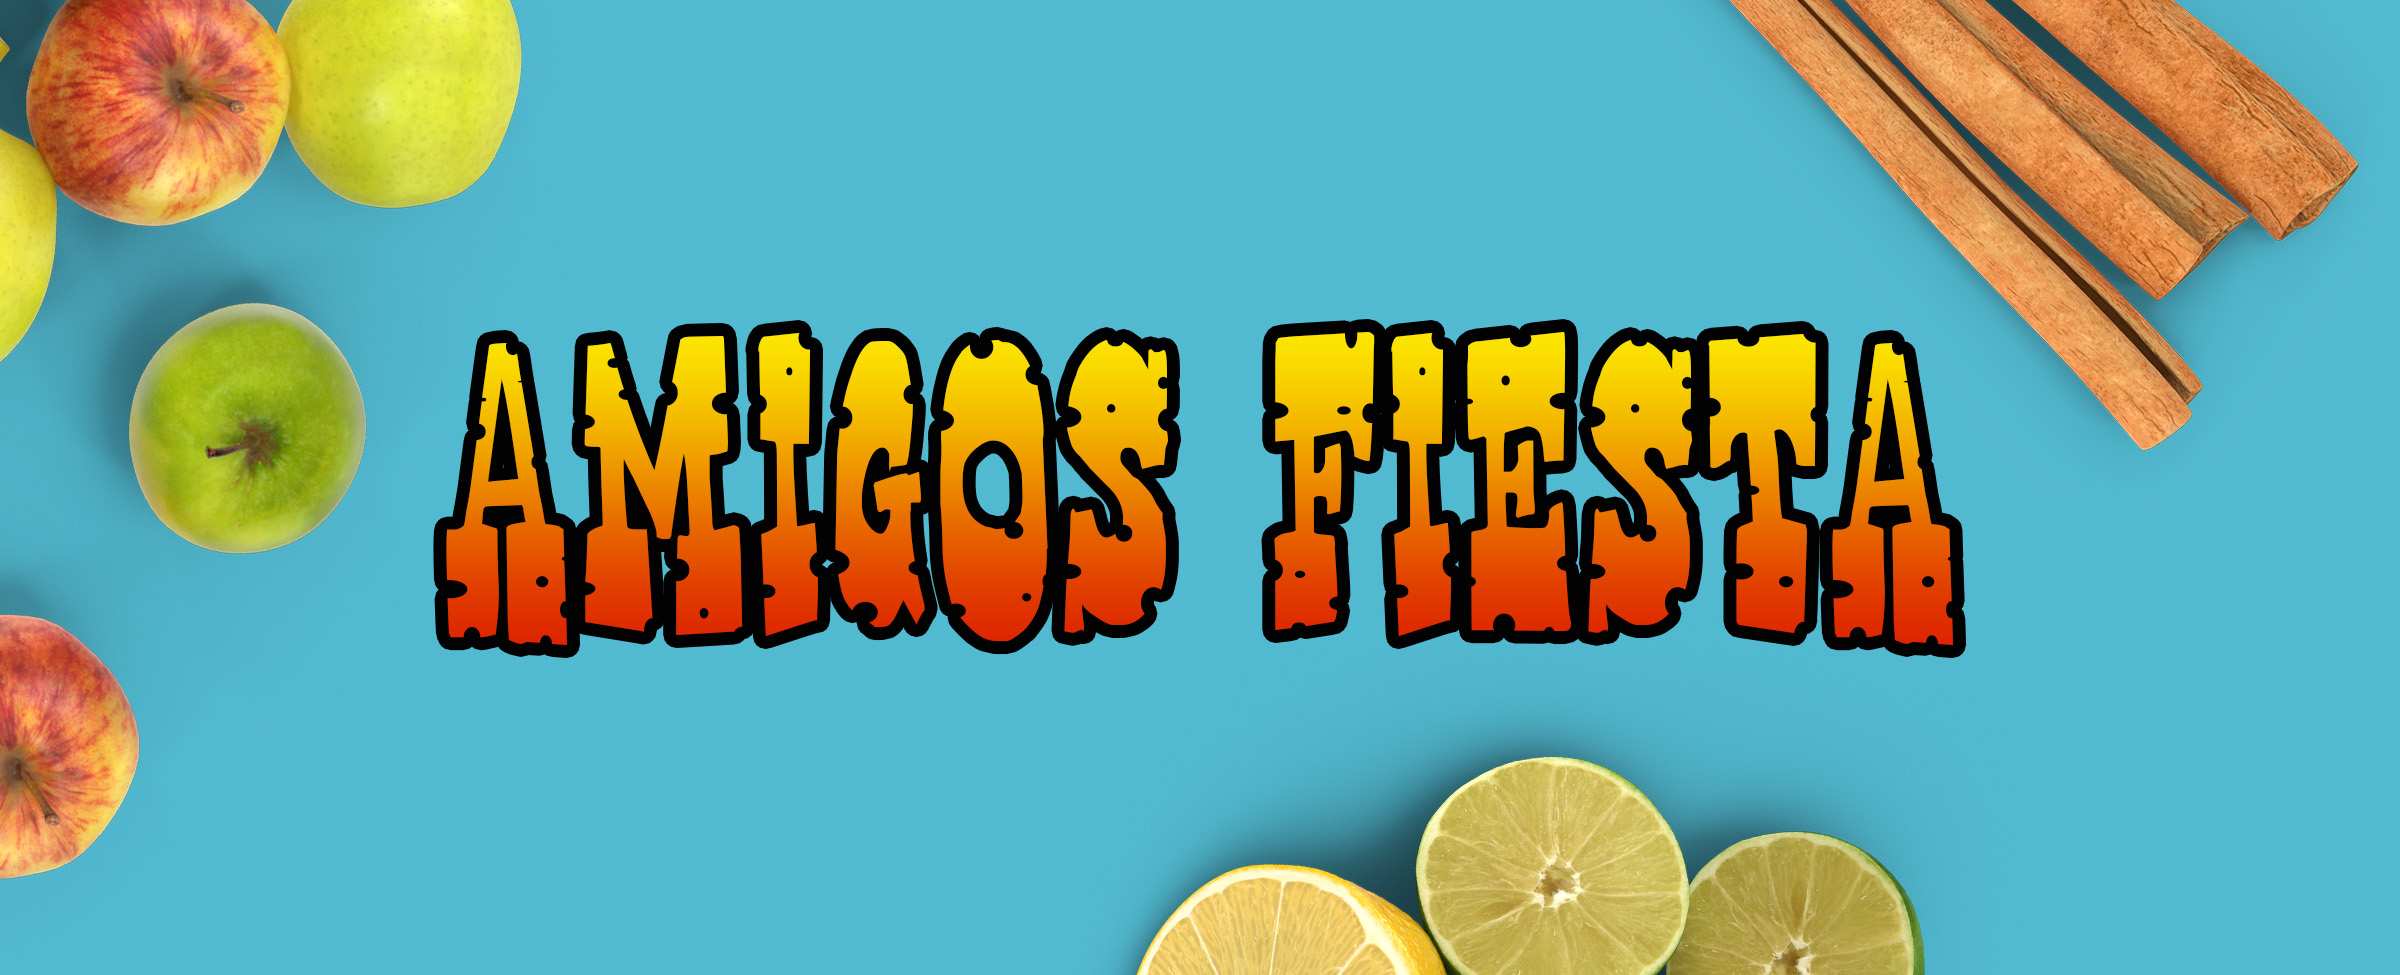 The logo for Amigos Fiesta from the Cafe Casino slot game is featured on top of a blue table surface, surrounded by apples, cut limes and cinnamon sticks. 